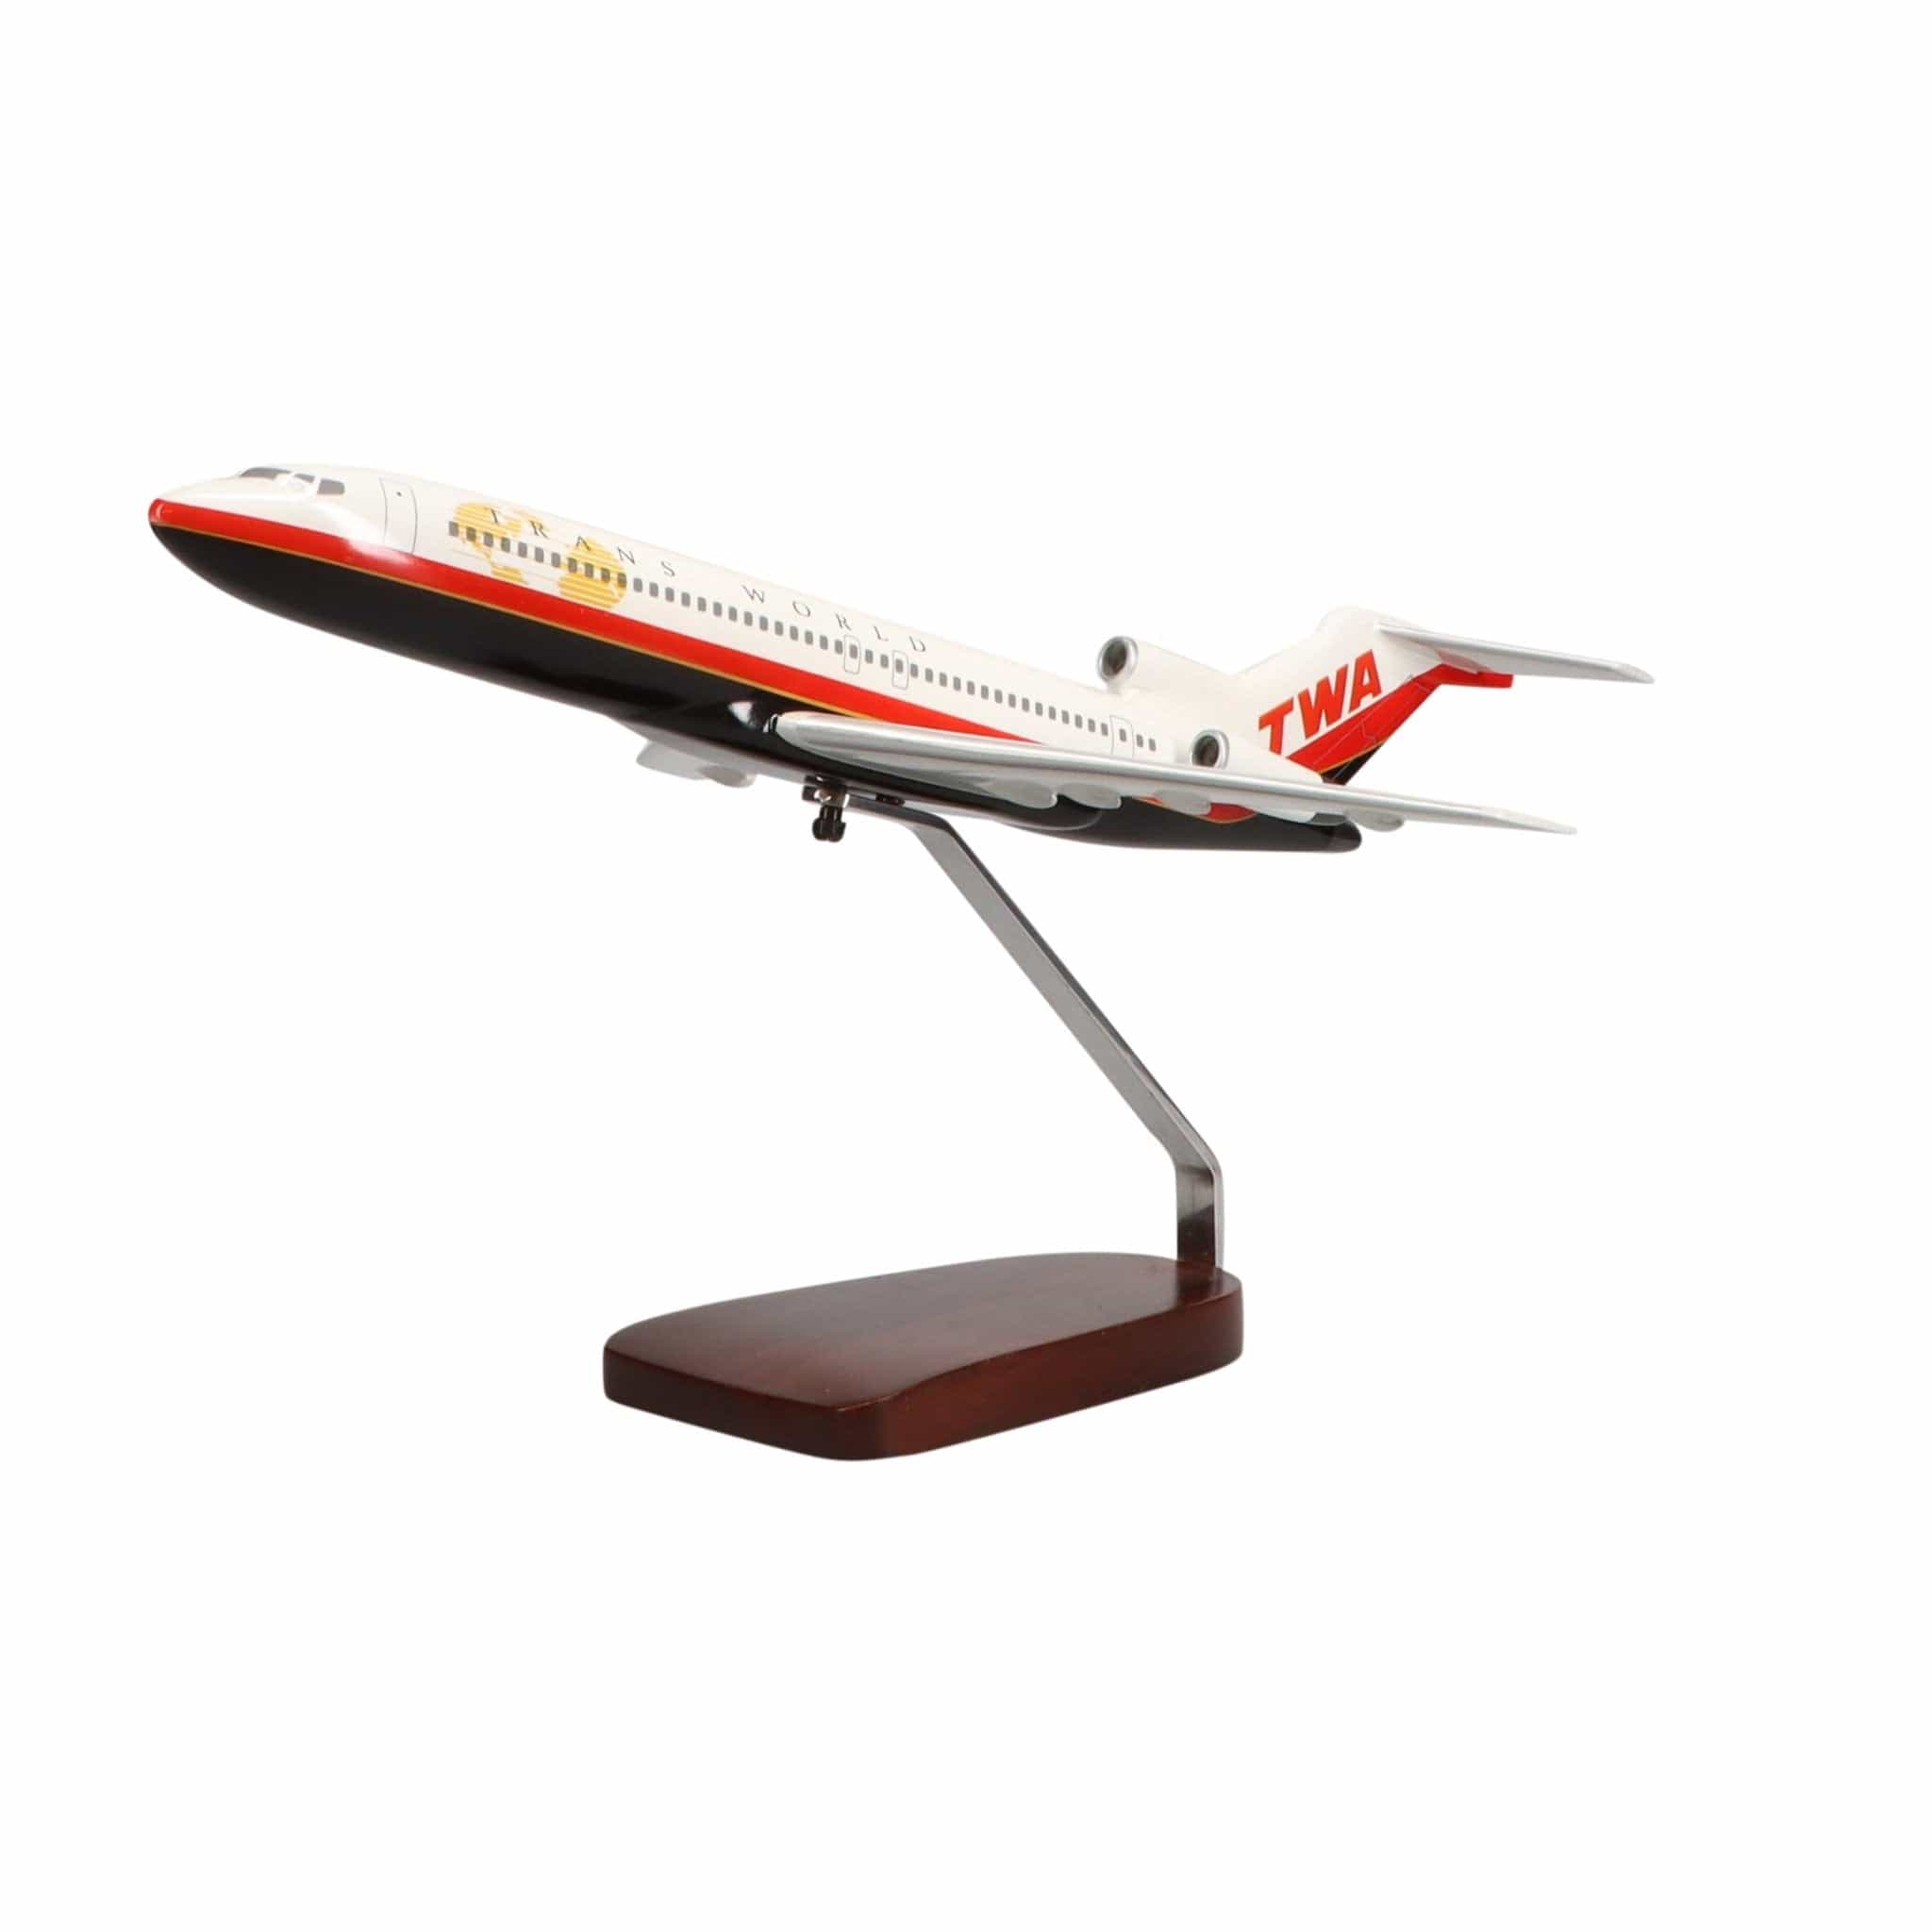 Boeing 727-200 TWA (Trans World Airlines) Limited Edition Large Mahogany Model - PilotMall.com